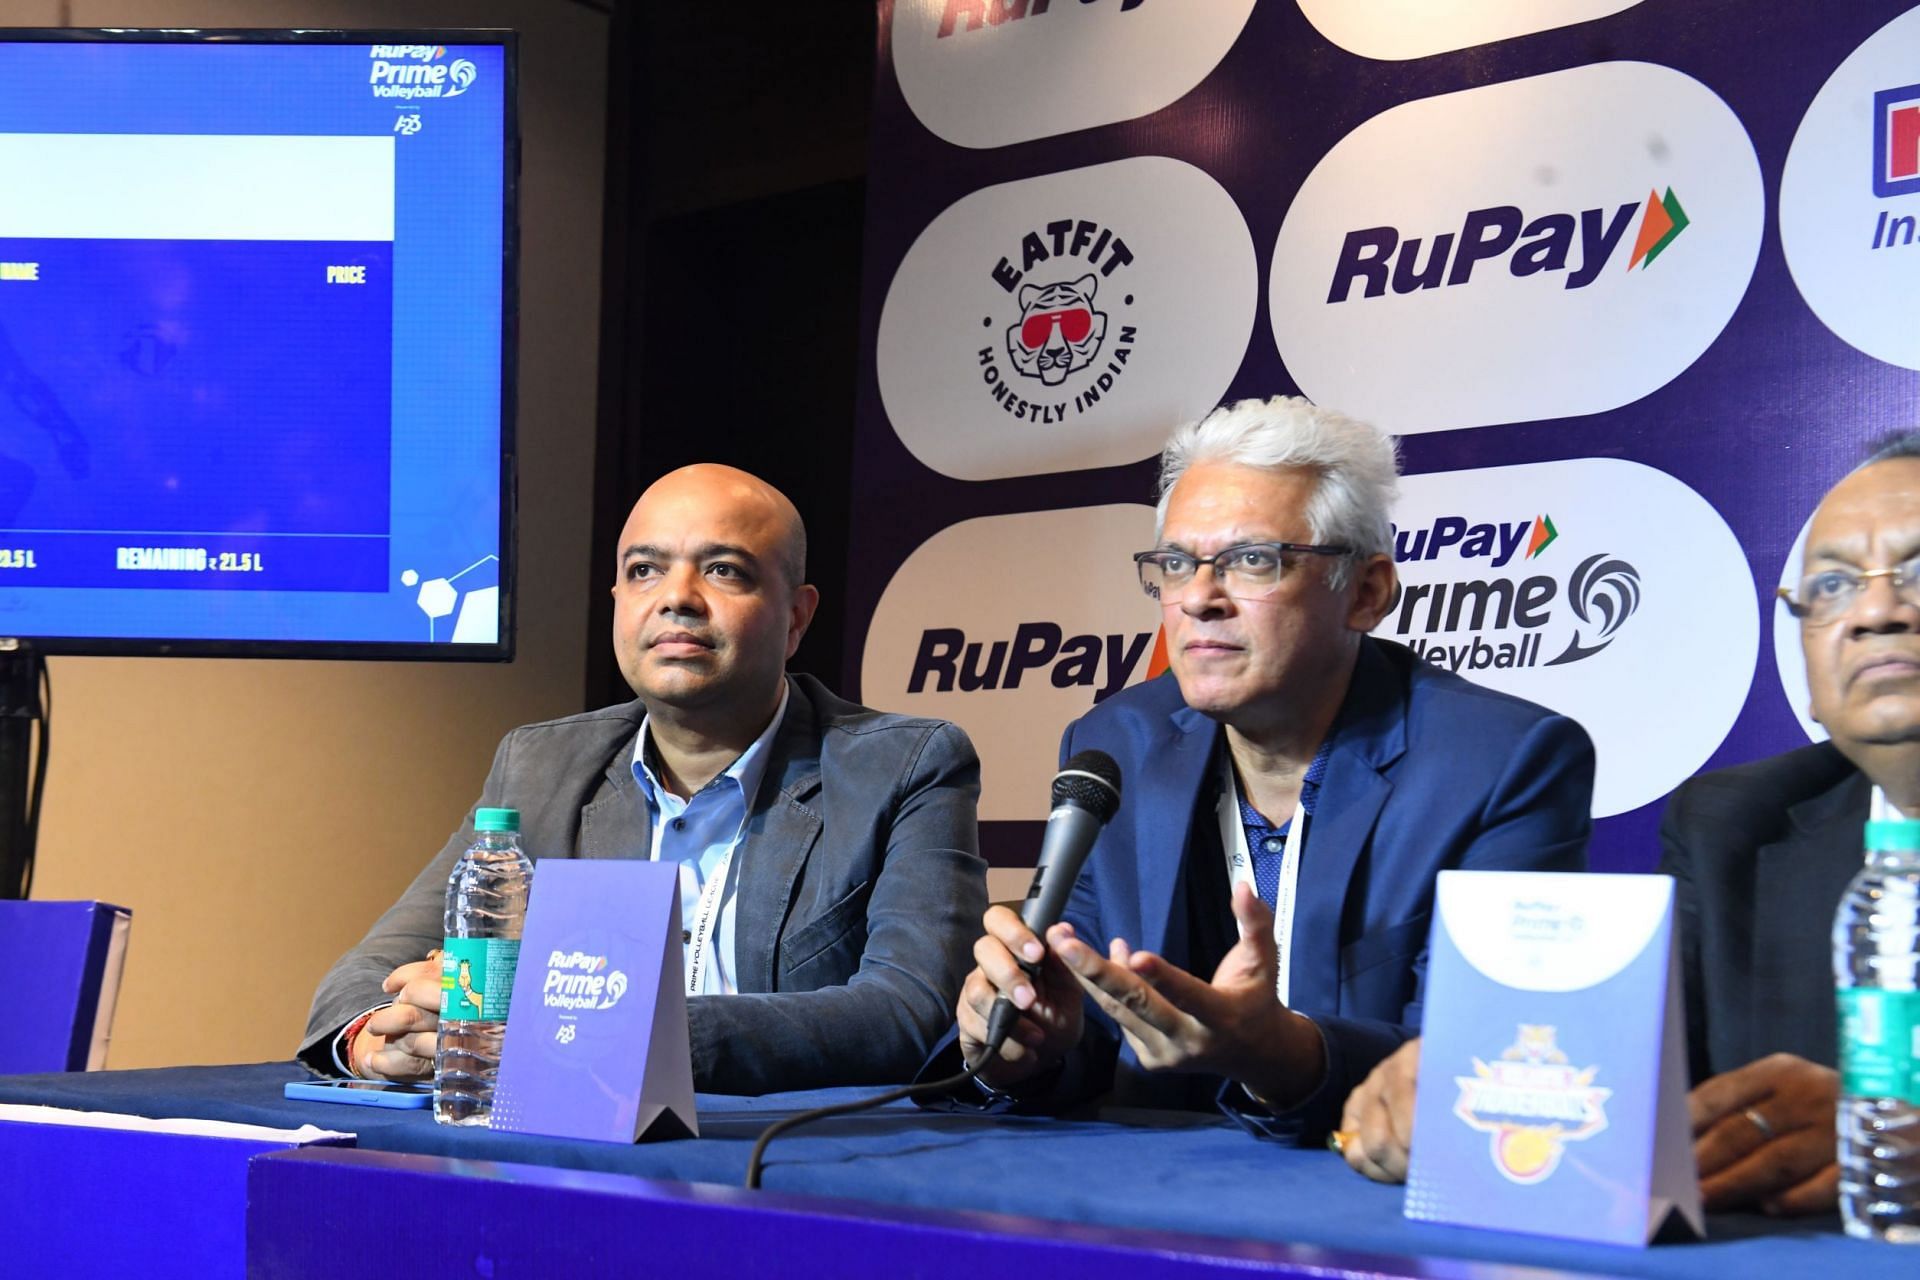 Managing Director and Co-Founder of Baseline Ventures, Tuhin Mishra (Left) at the Volleyball League Auction alongside Joy Bhattacharjya, Vice President of Baseline Ventures.